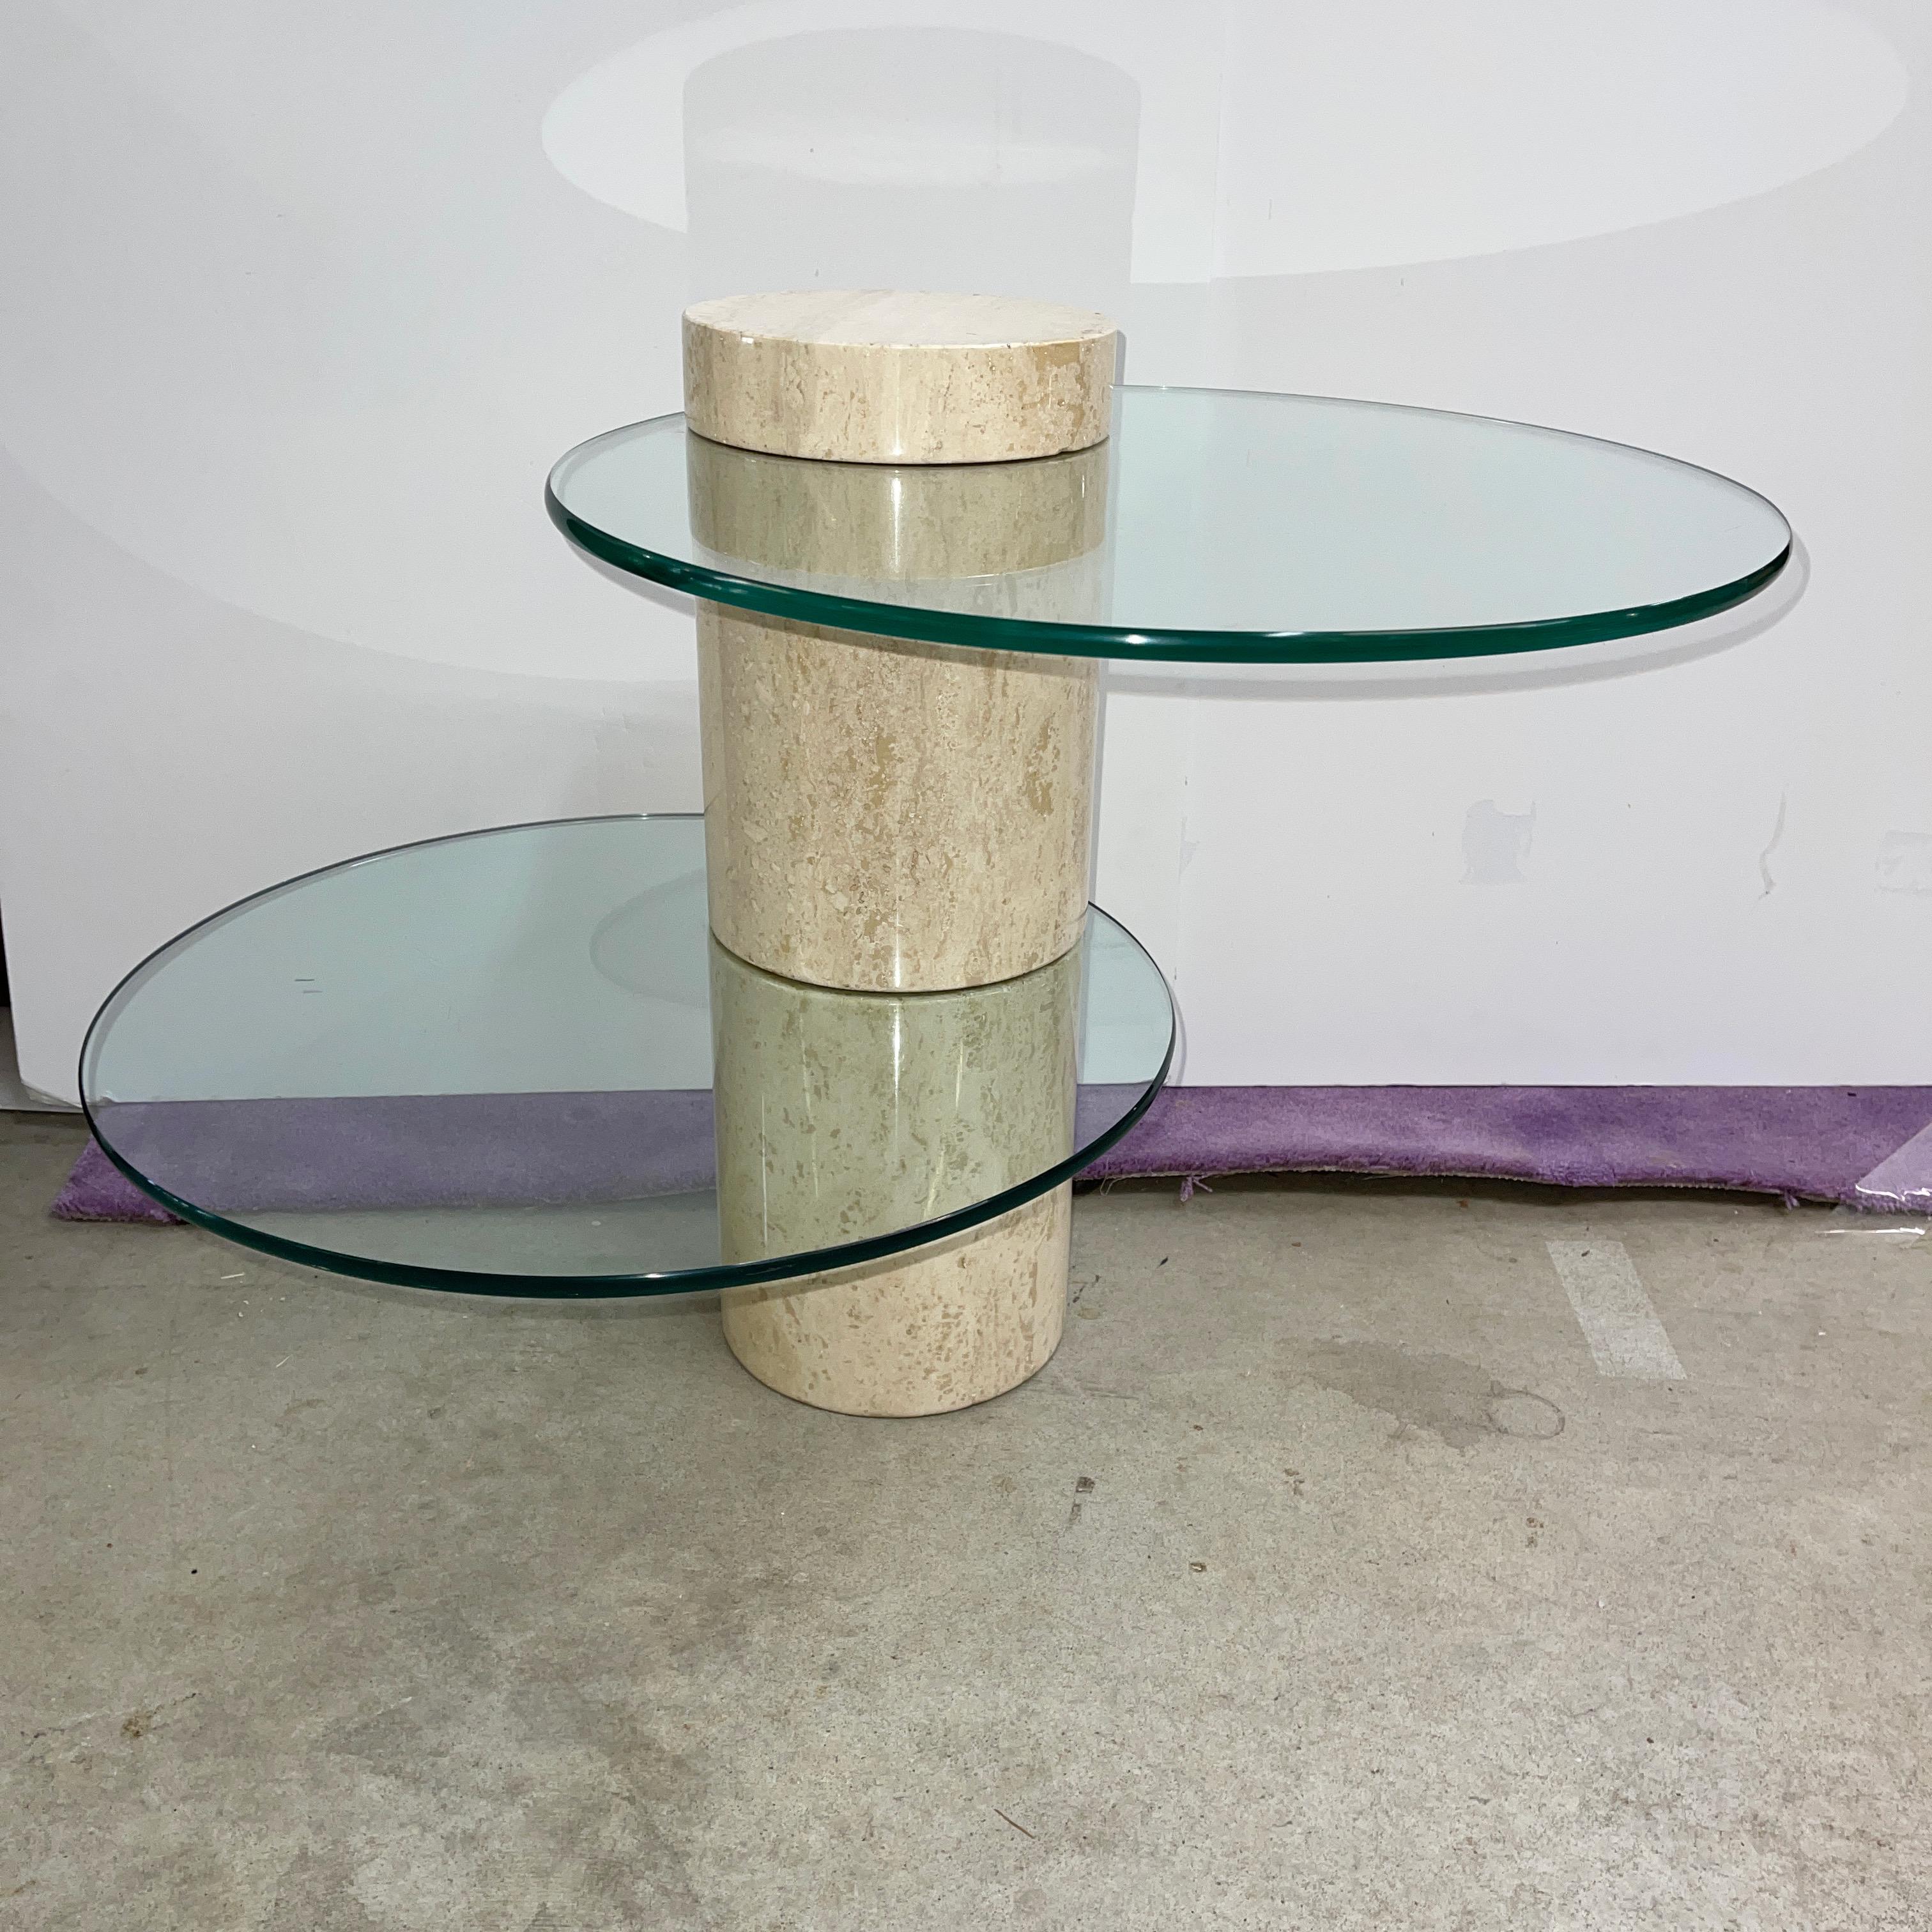 Late 20th Century Travertine Marble Occasional Table with Two Positionable Glass Tops For Sale